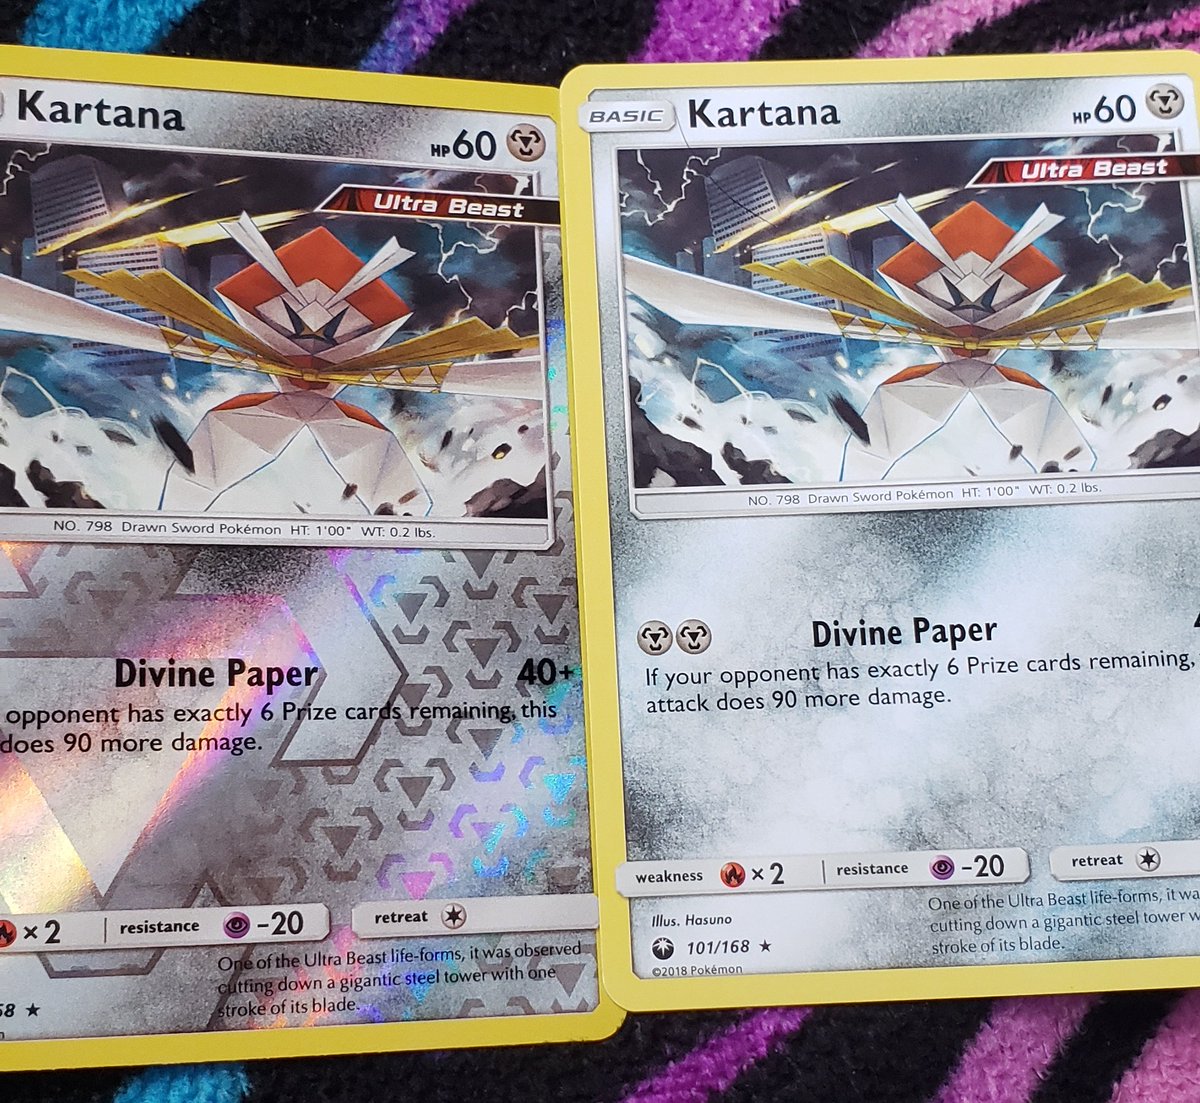 kartana!! i have a foil and non-foil card!! the art is super cool too!!